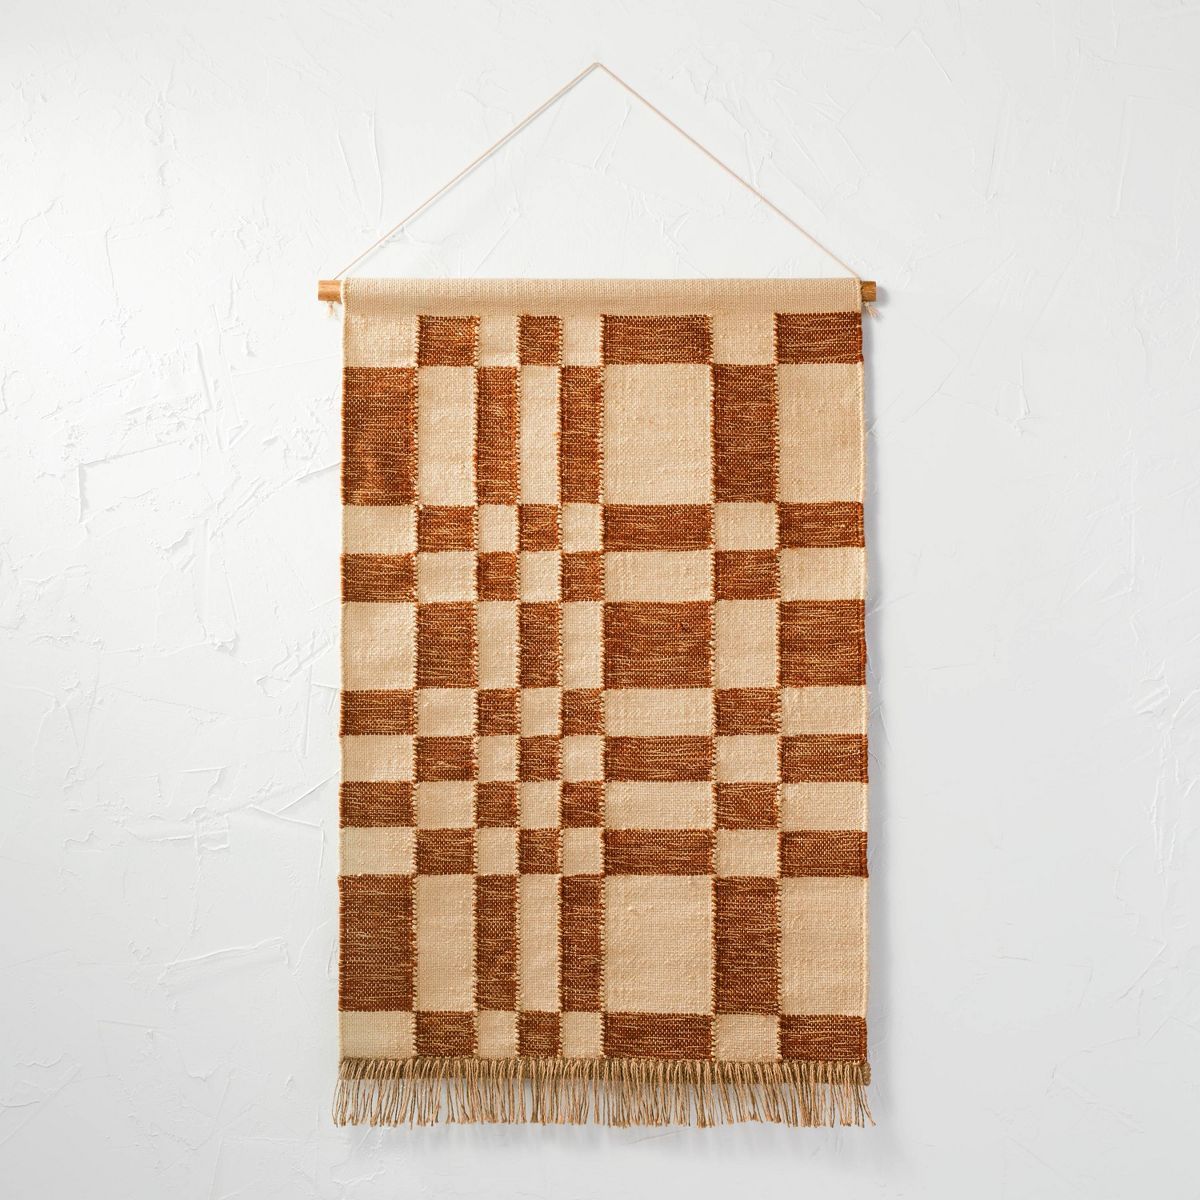 24" x 36" Hand Woven Jute/Polyester Wall Art with Wooden Dowel - Threshold™ | Target